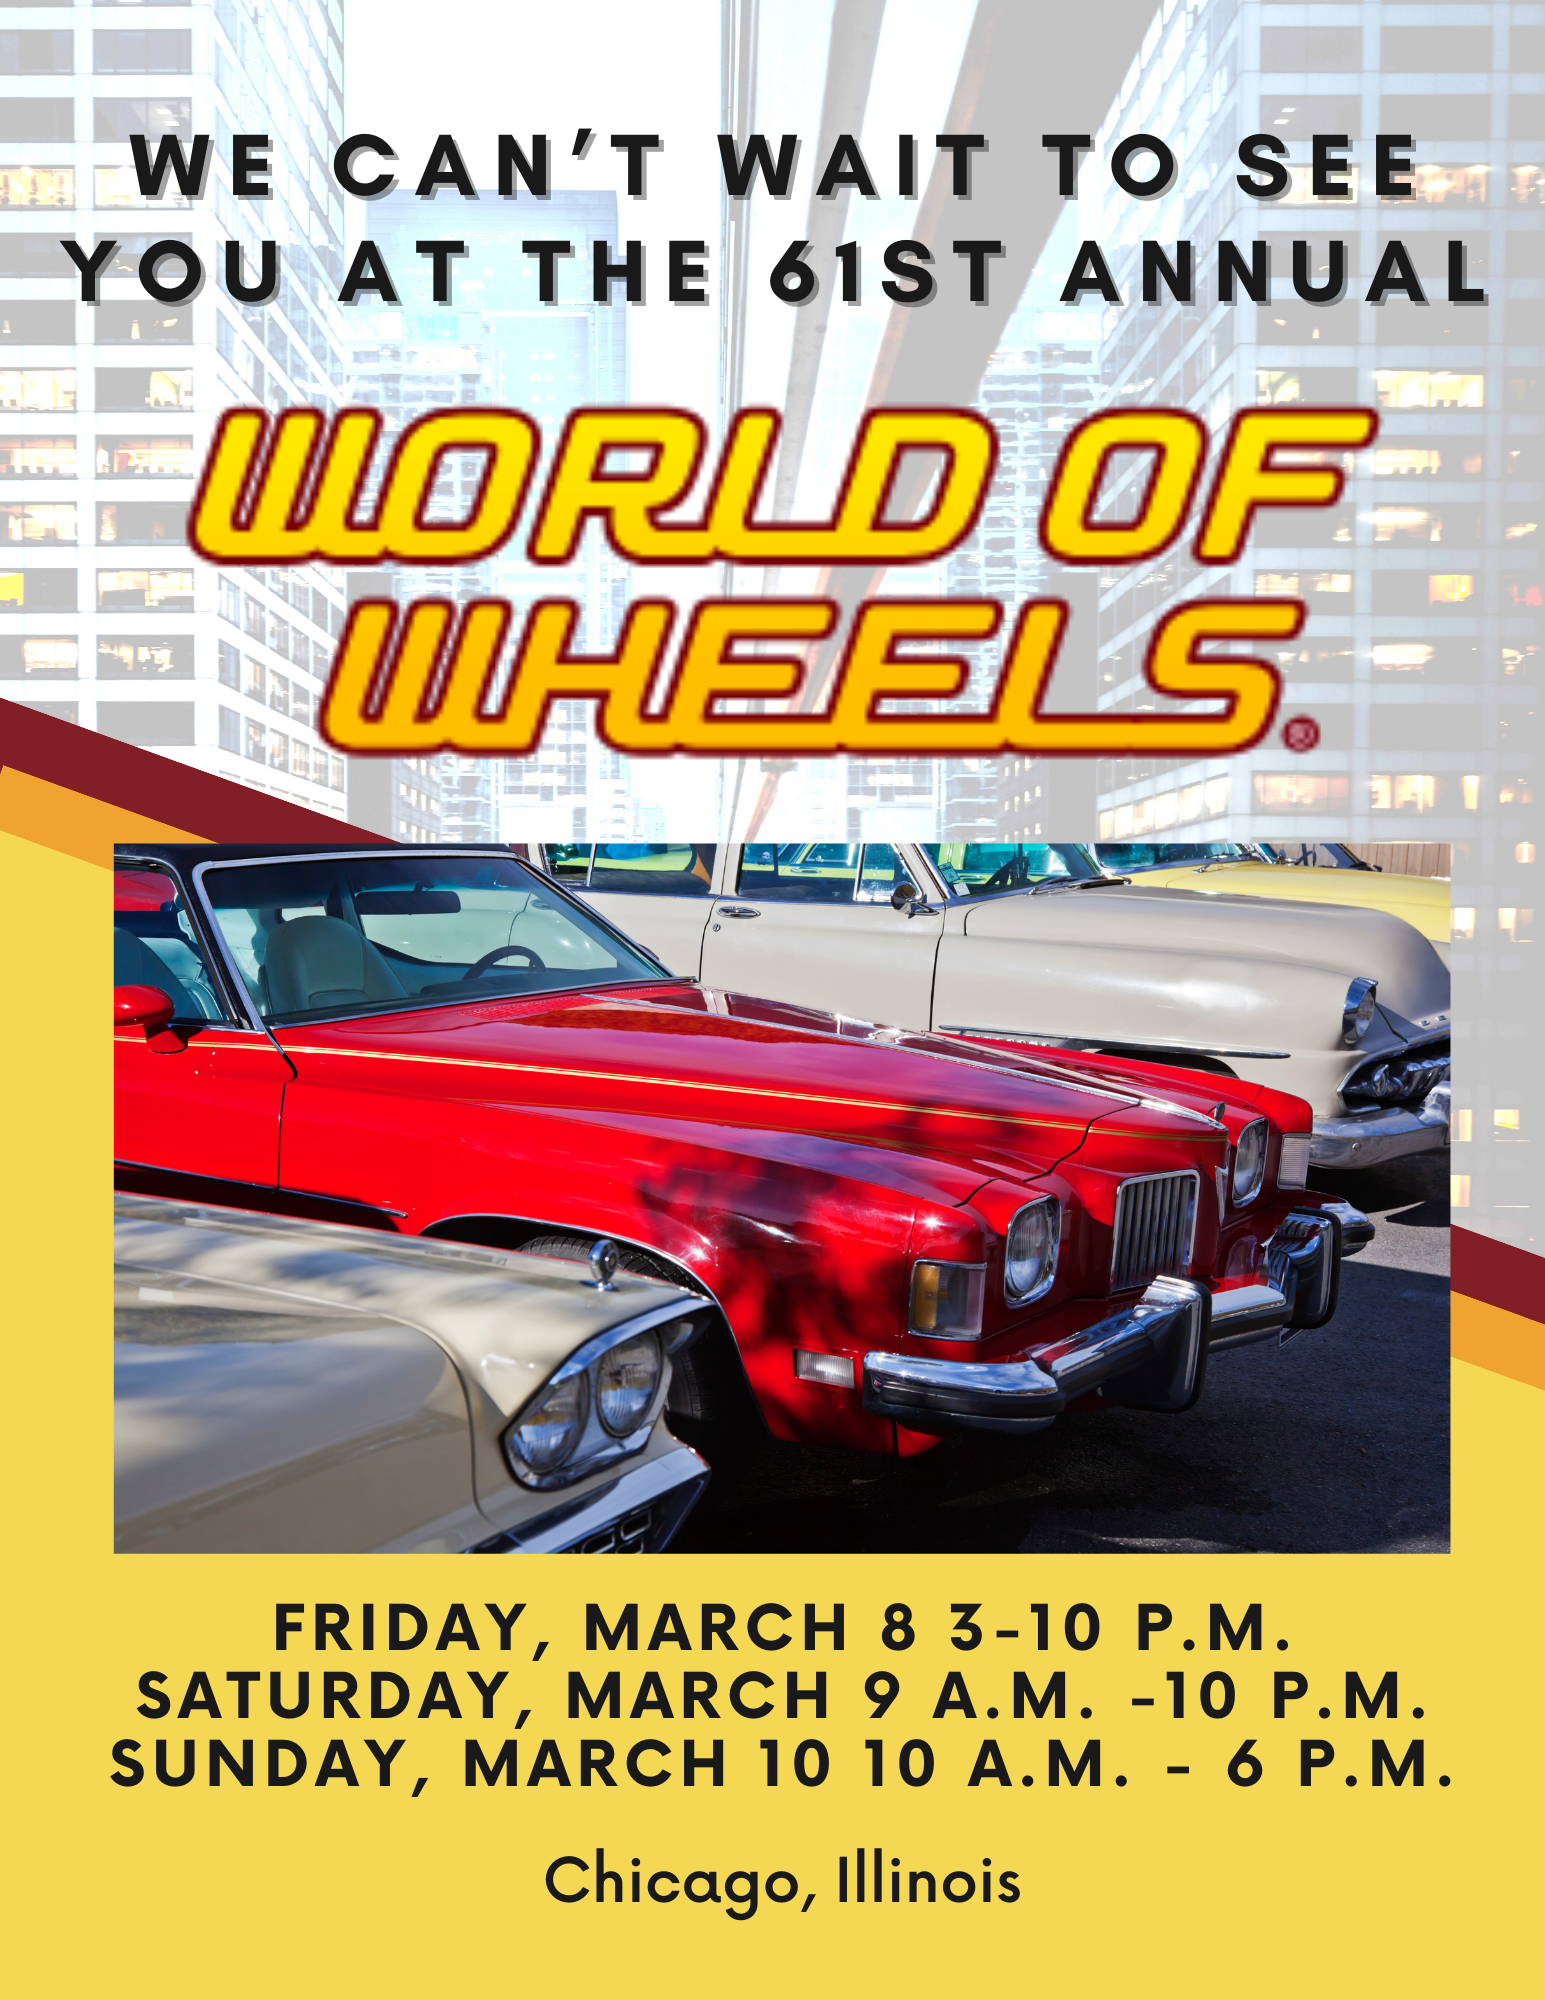 We can't wait to see you at the 61st Annual World of Wheels event this weekend!